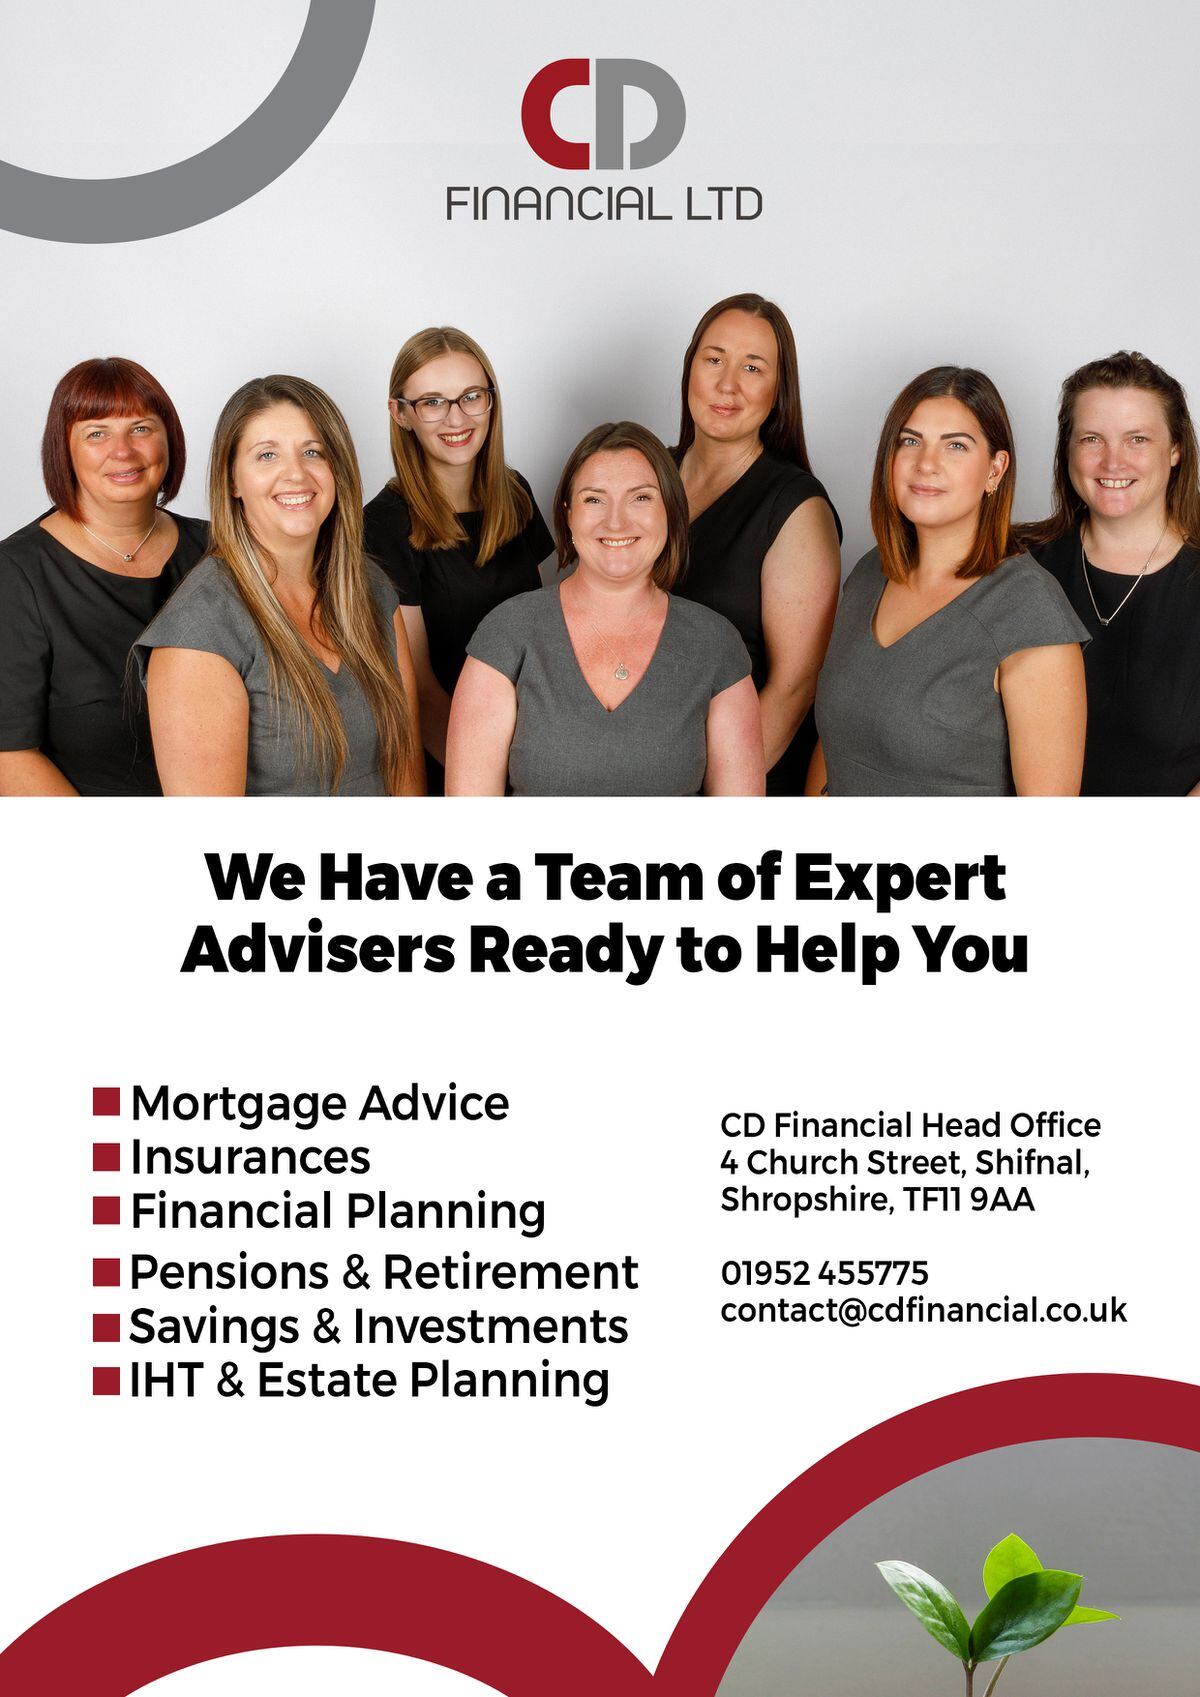 We have a team of advisors ready to help